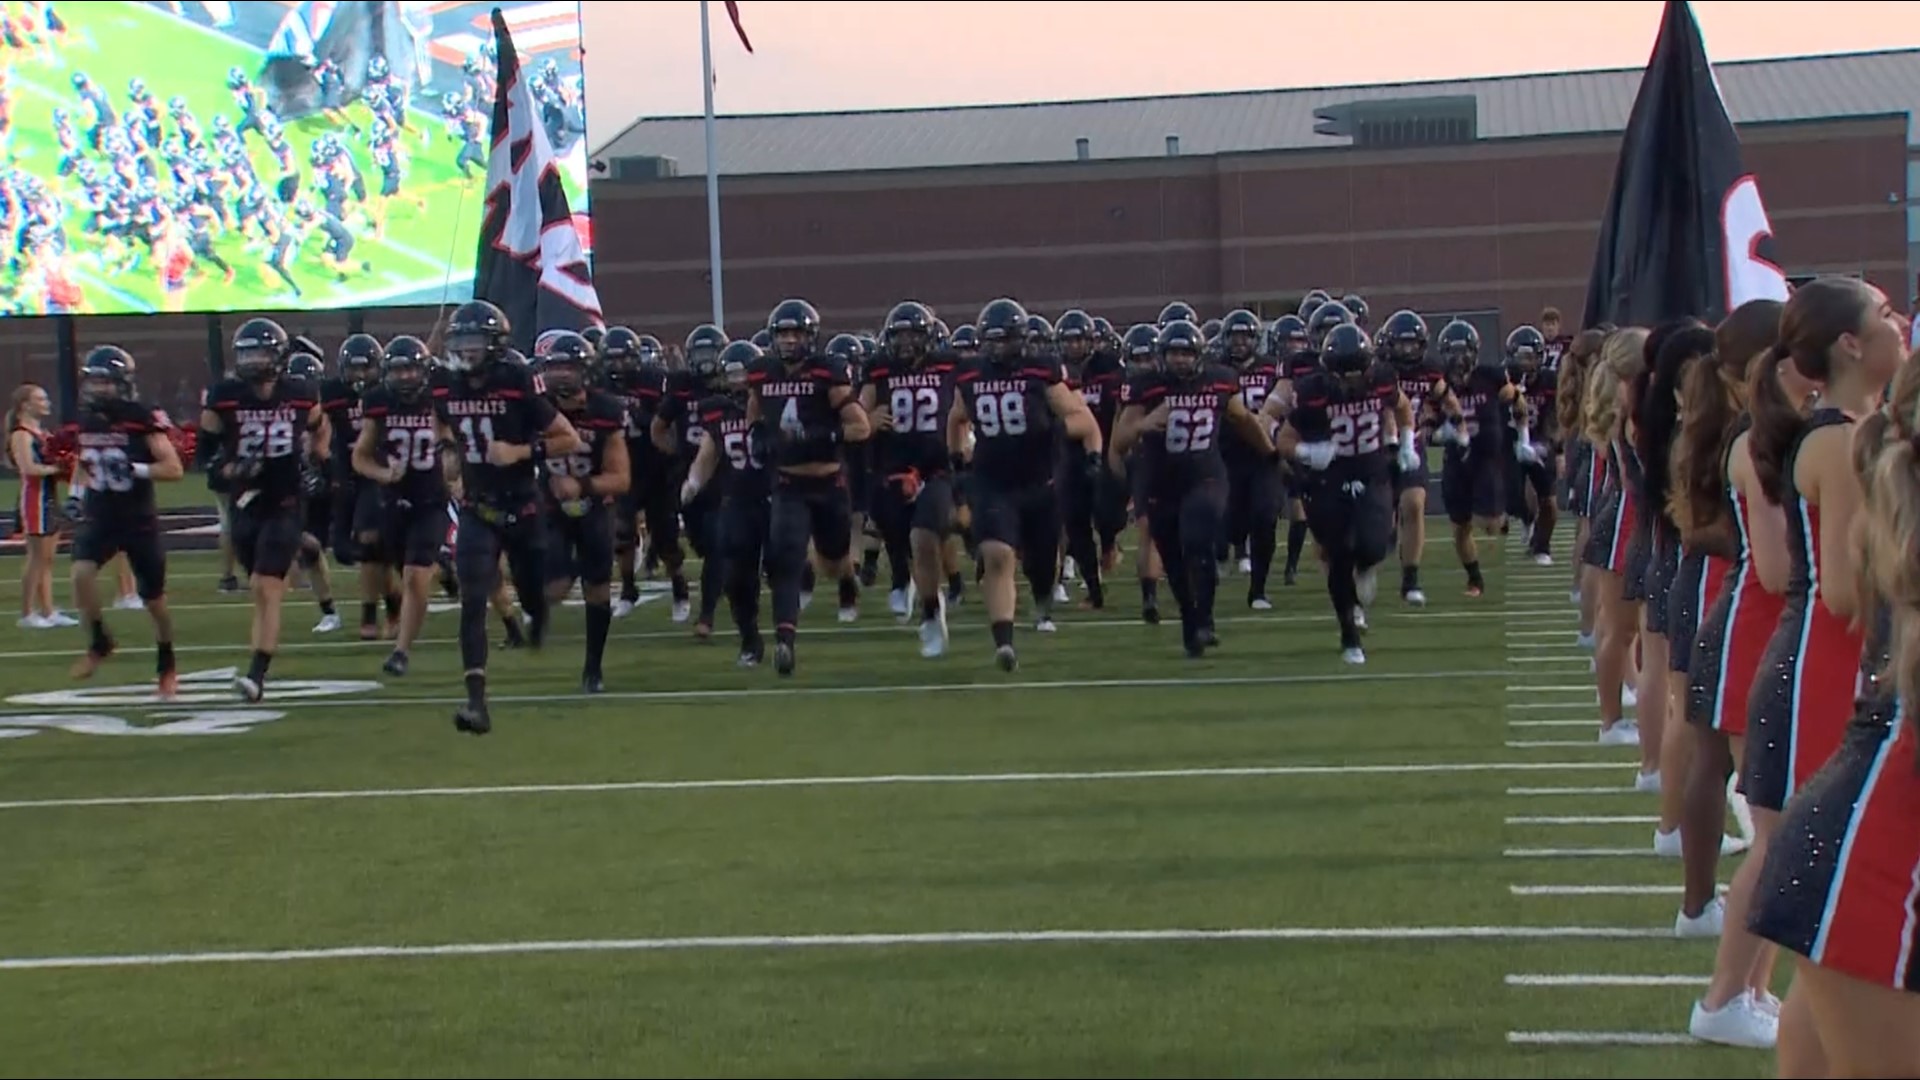 The Bearcats have won 11 UIL State Championships since 1998, and they entered the 2023 season as the reigning Class 5A Division 1 champs.